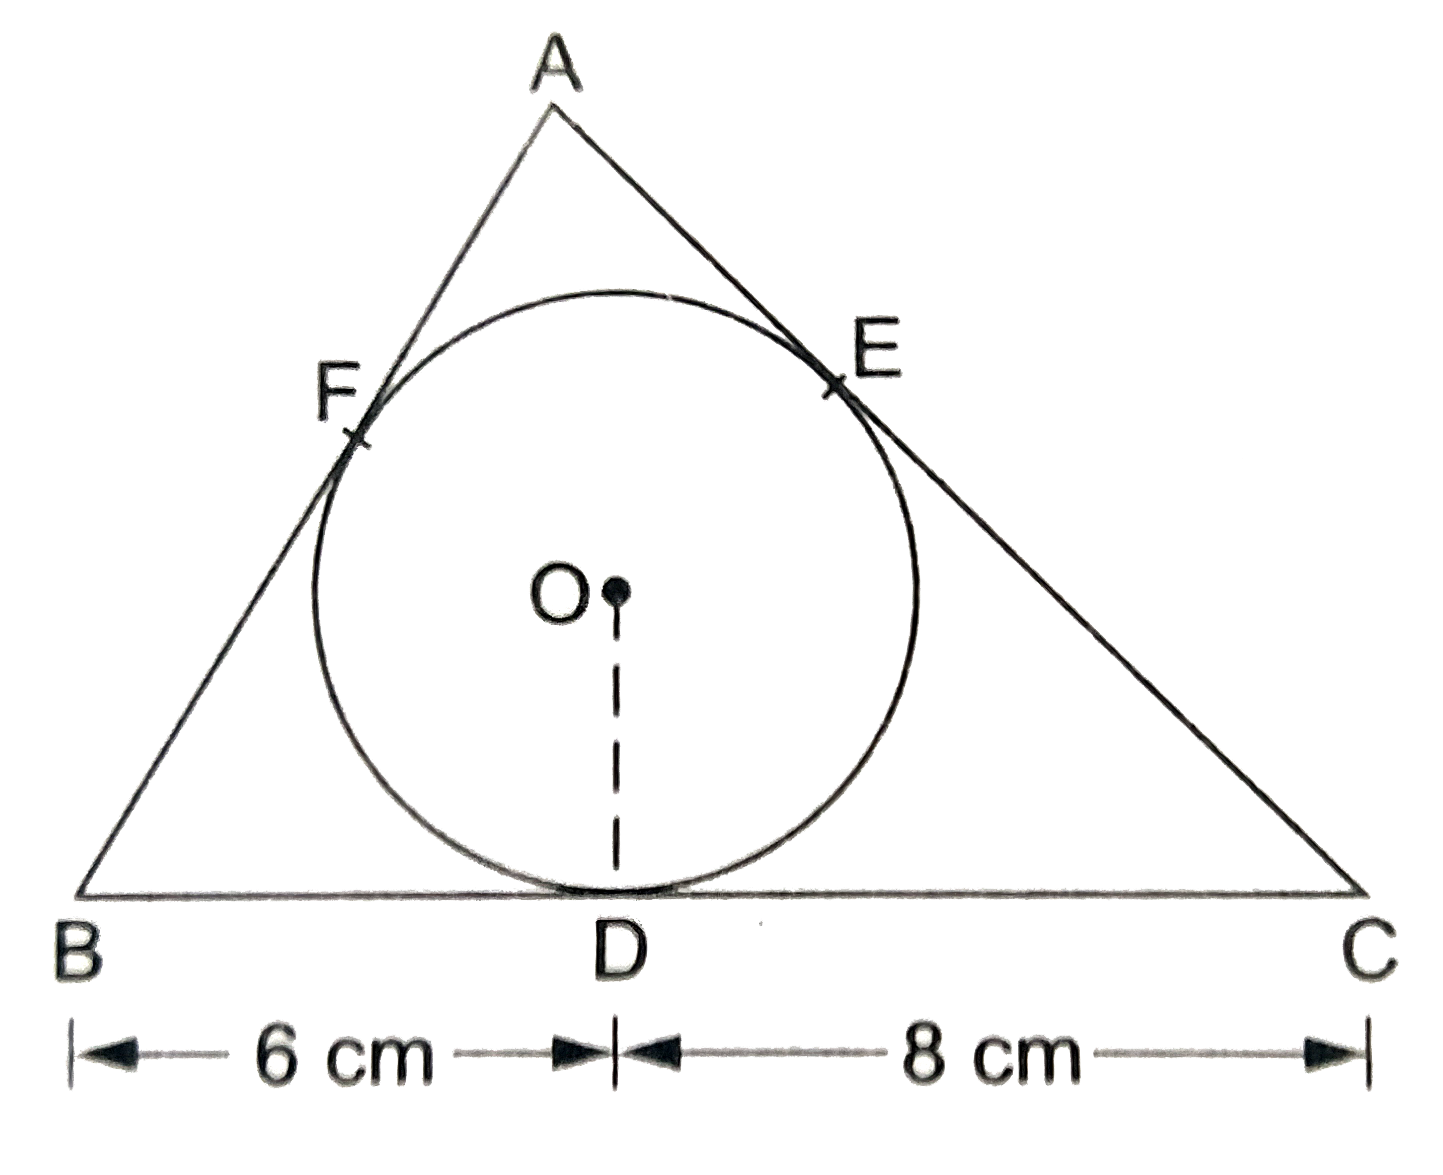 A triangle ABC is drawn to circumscribe a circle of radius 4cm such that the segments BD and DC into which BC is divided by the point of contact D are of lengths 6cm and 8cm respectively. Find the lengths of the sides AB and AC.